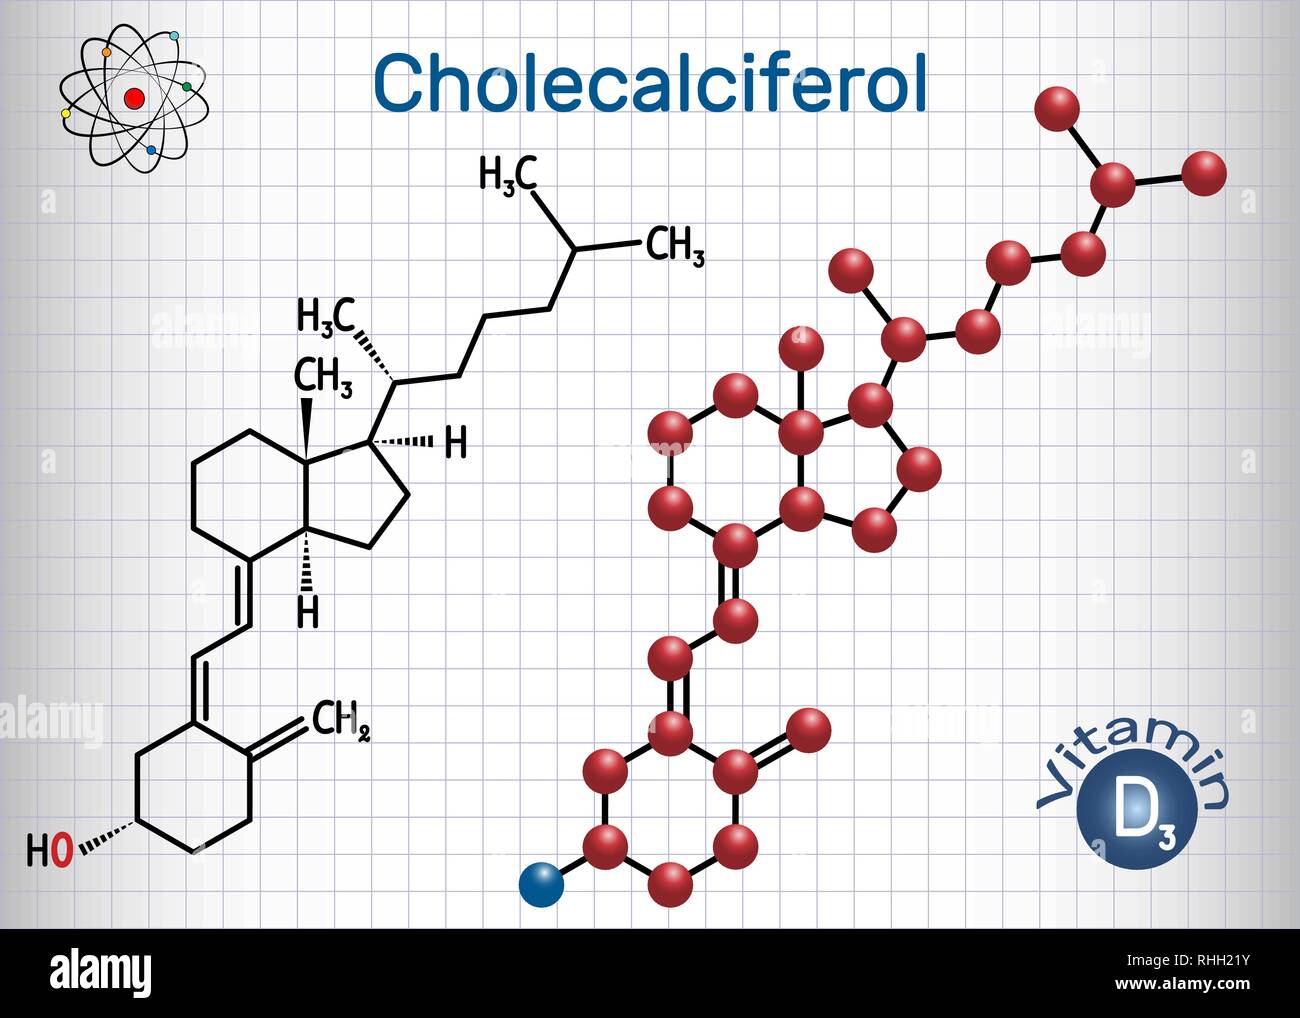 Cholecalciferol ( colecalciferol, vitamin D3) molecule. Structural chemical formula and molecule model. Sheet of paper in a cage. Vector illustration Stock Vector